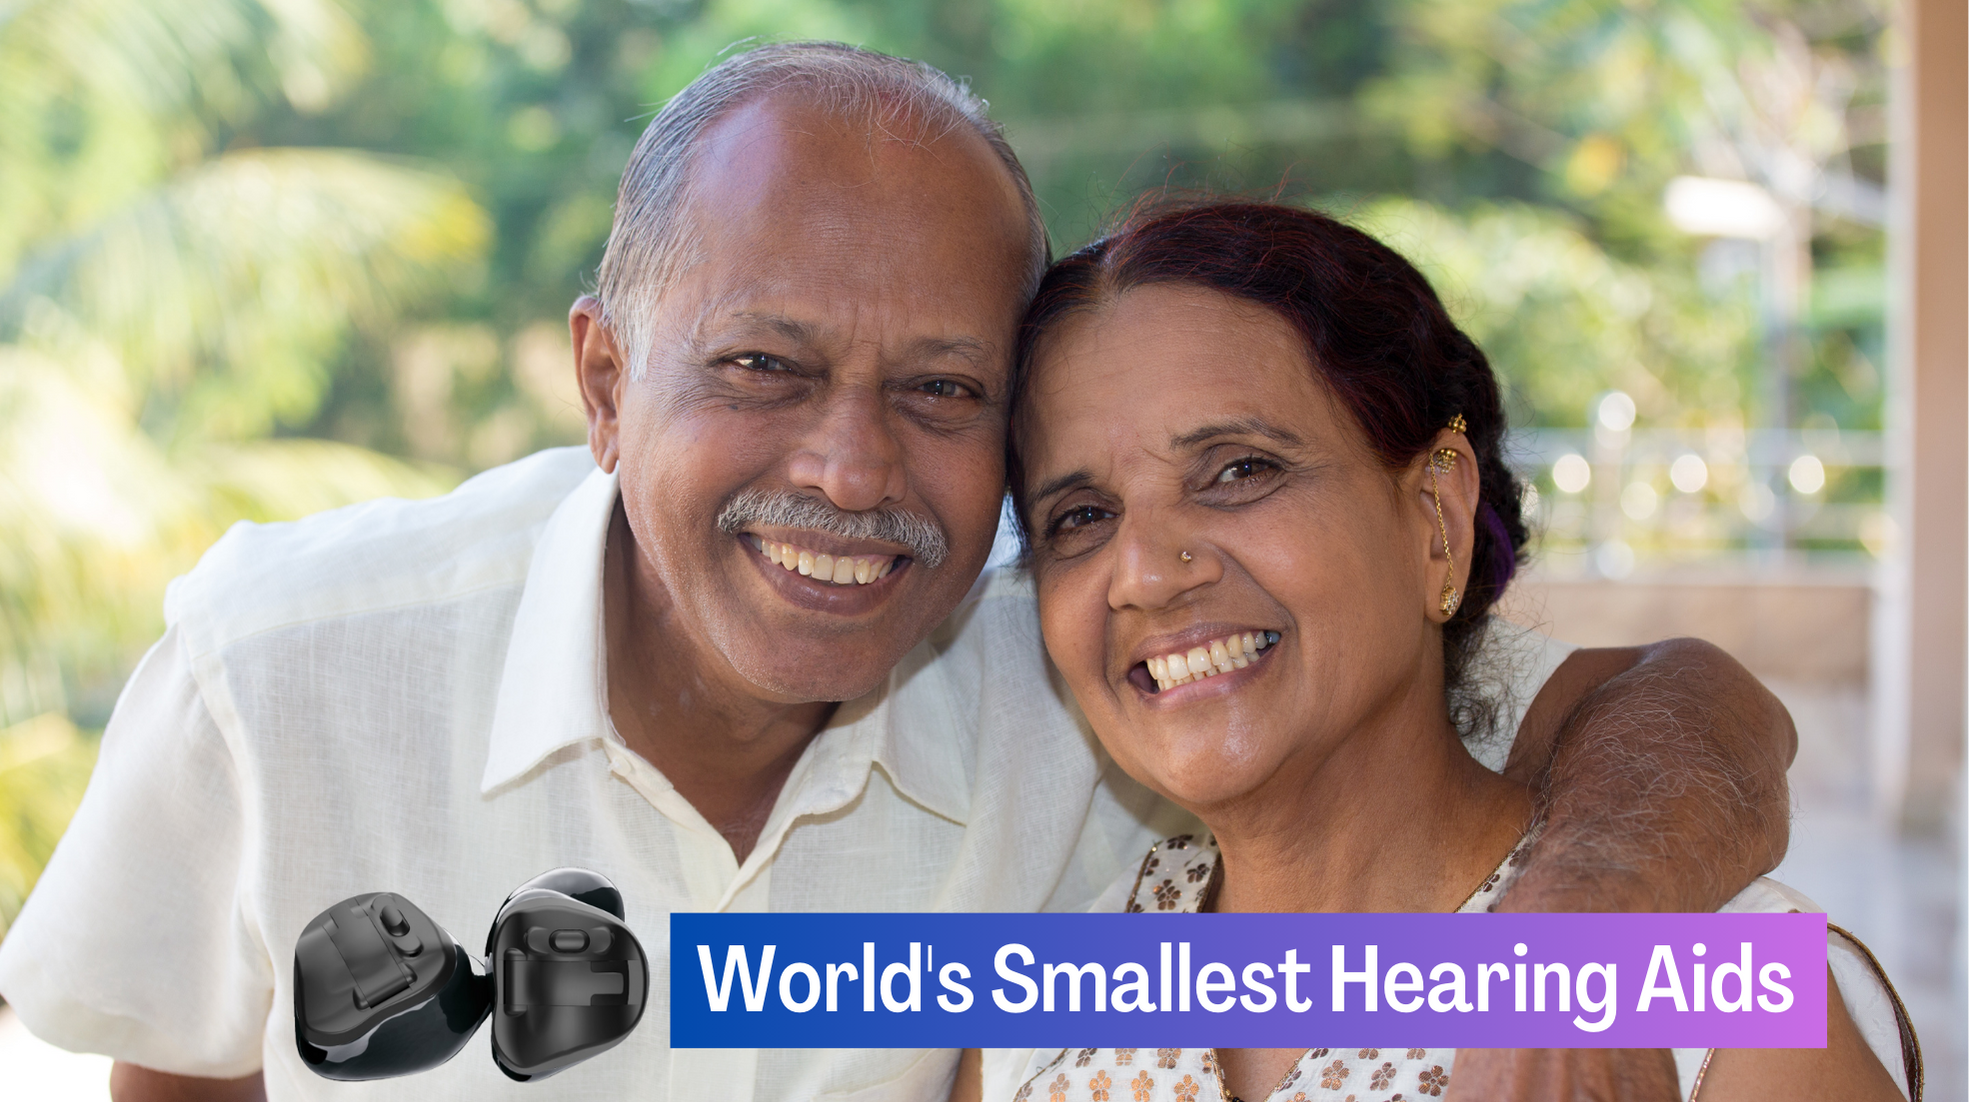 Experience Invisible Hearing Power with the World’s Smallest Hearing Aids